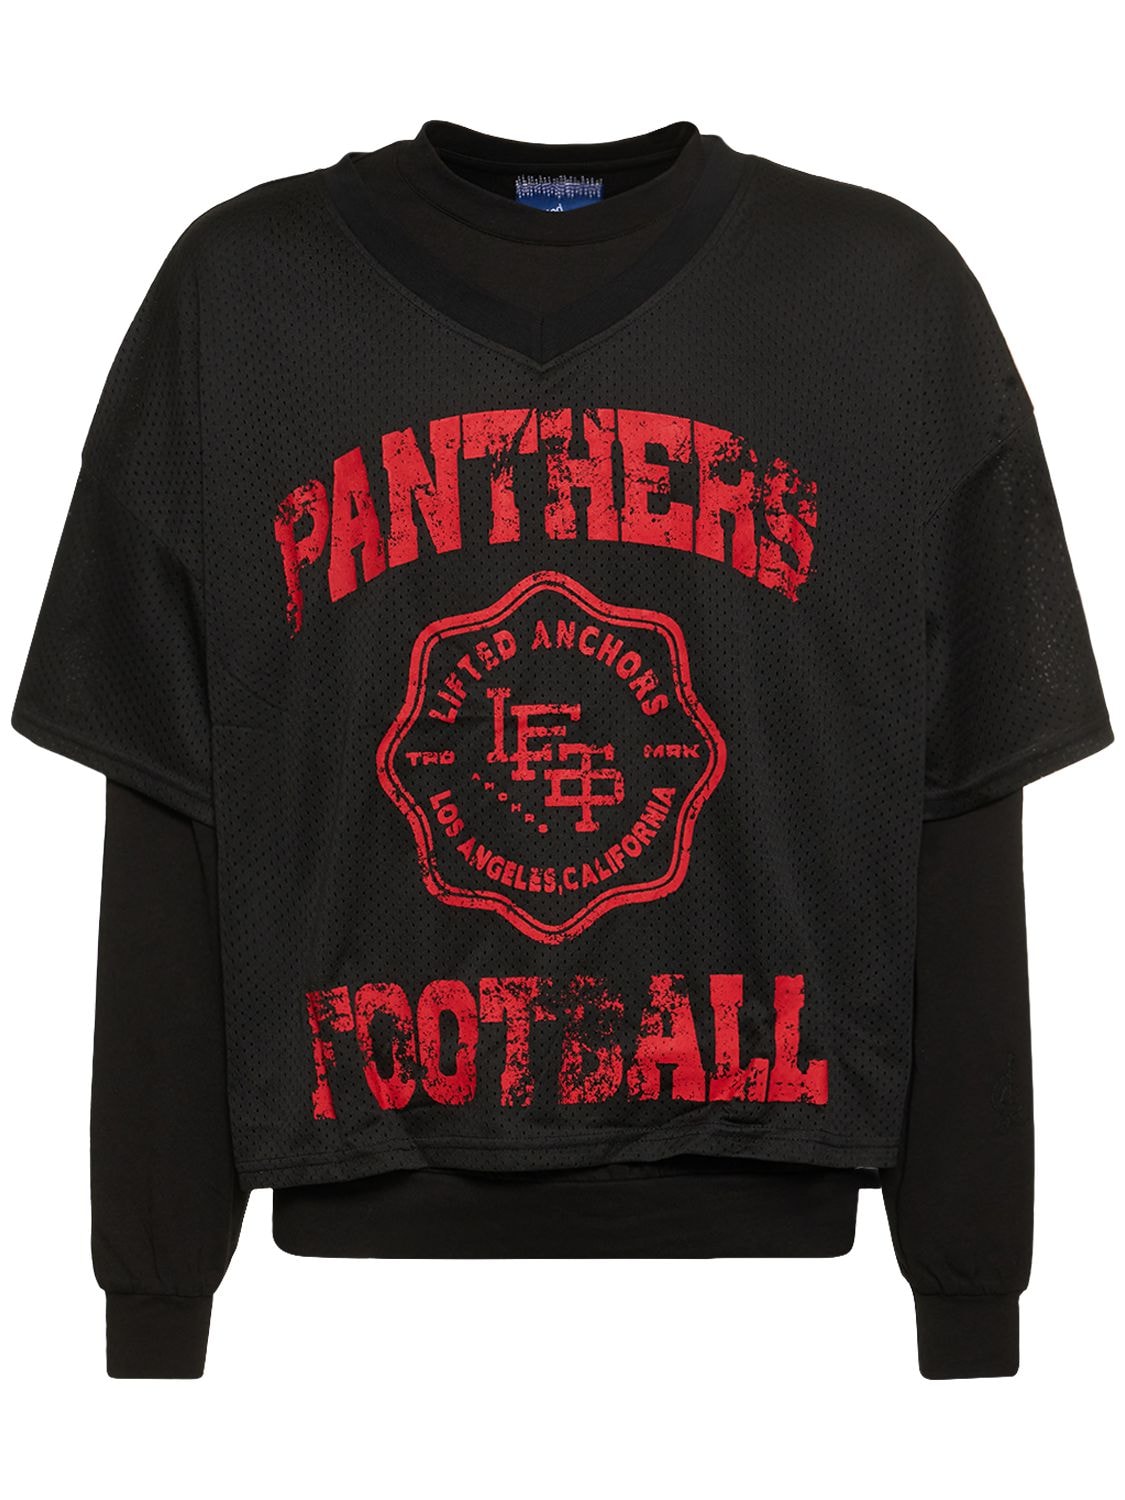 Lifted Anchors Panther 2-piece Jersey & Sweatshirt In Animal Print